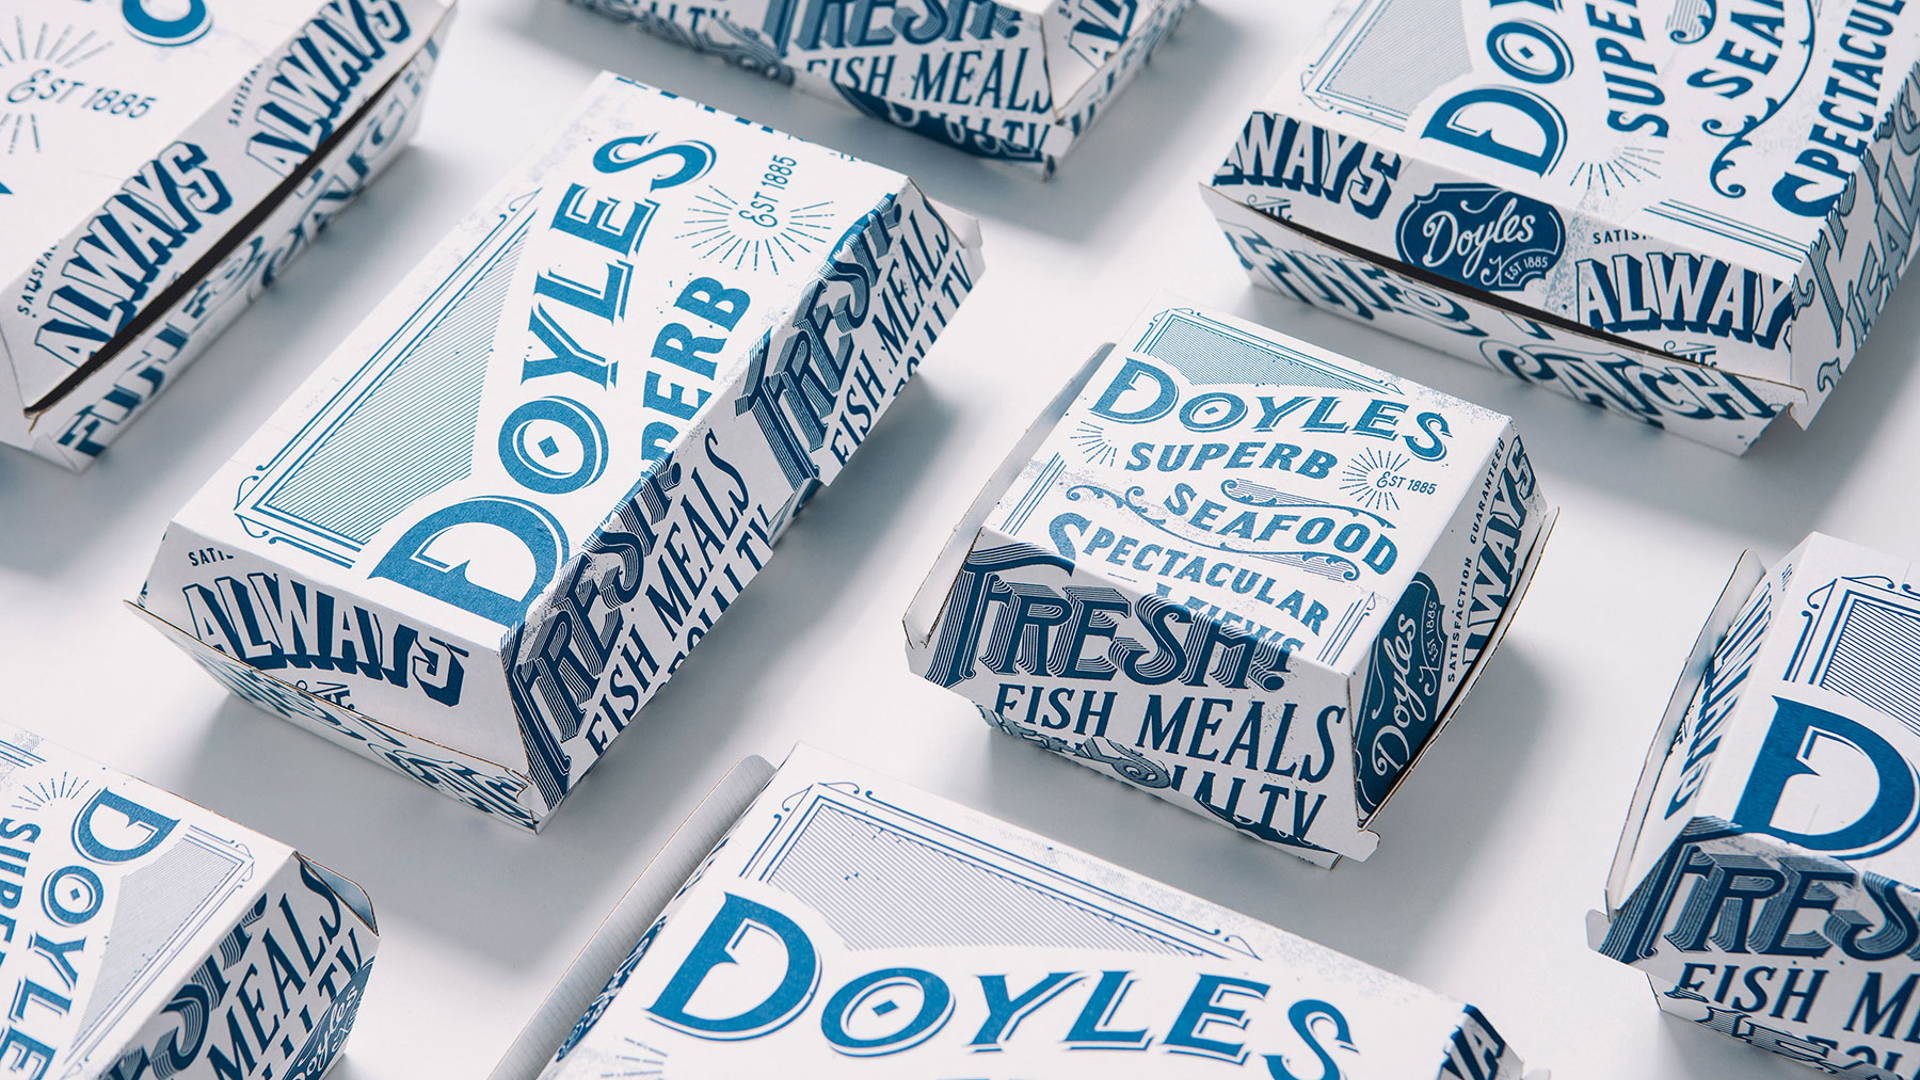 Featured image for Doyles Seafood Comes With Packaging Inspired By Newspaper Headlines